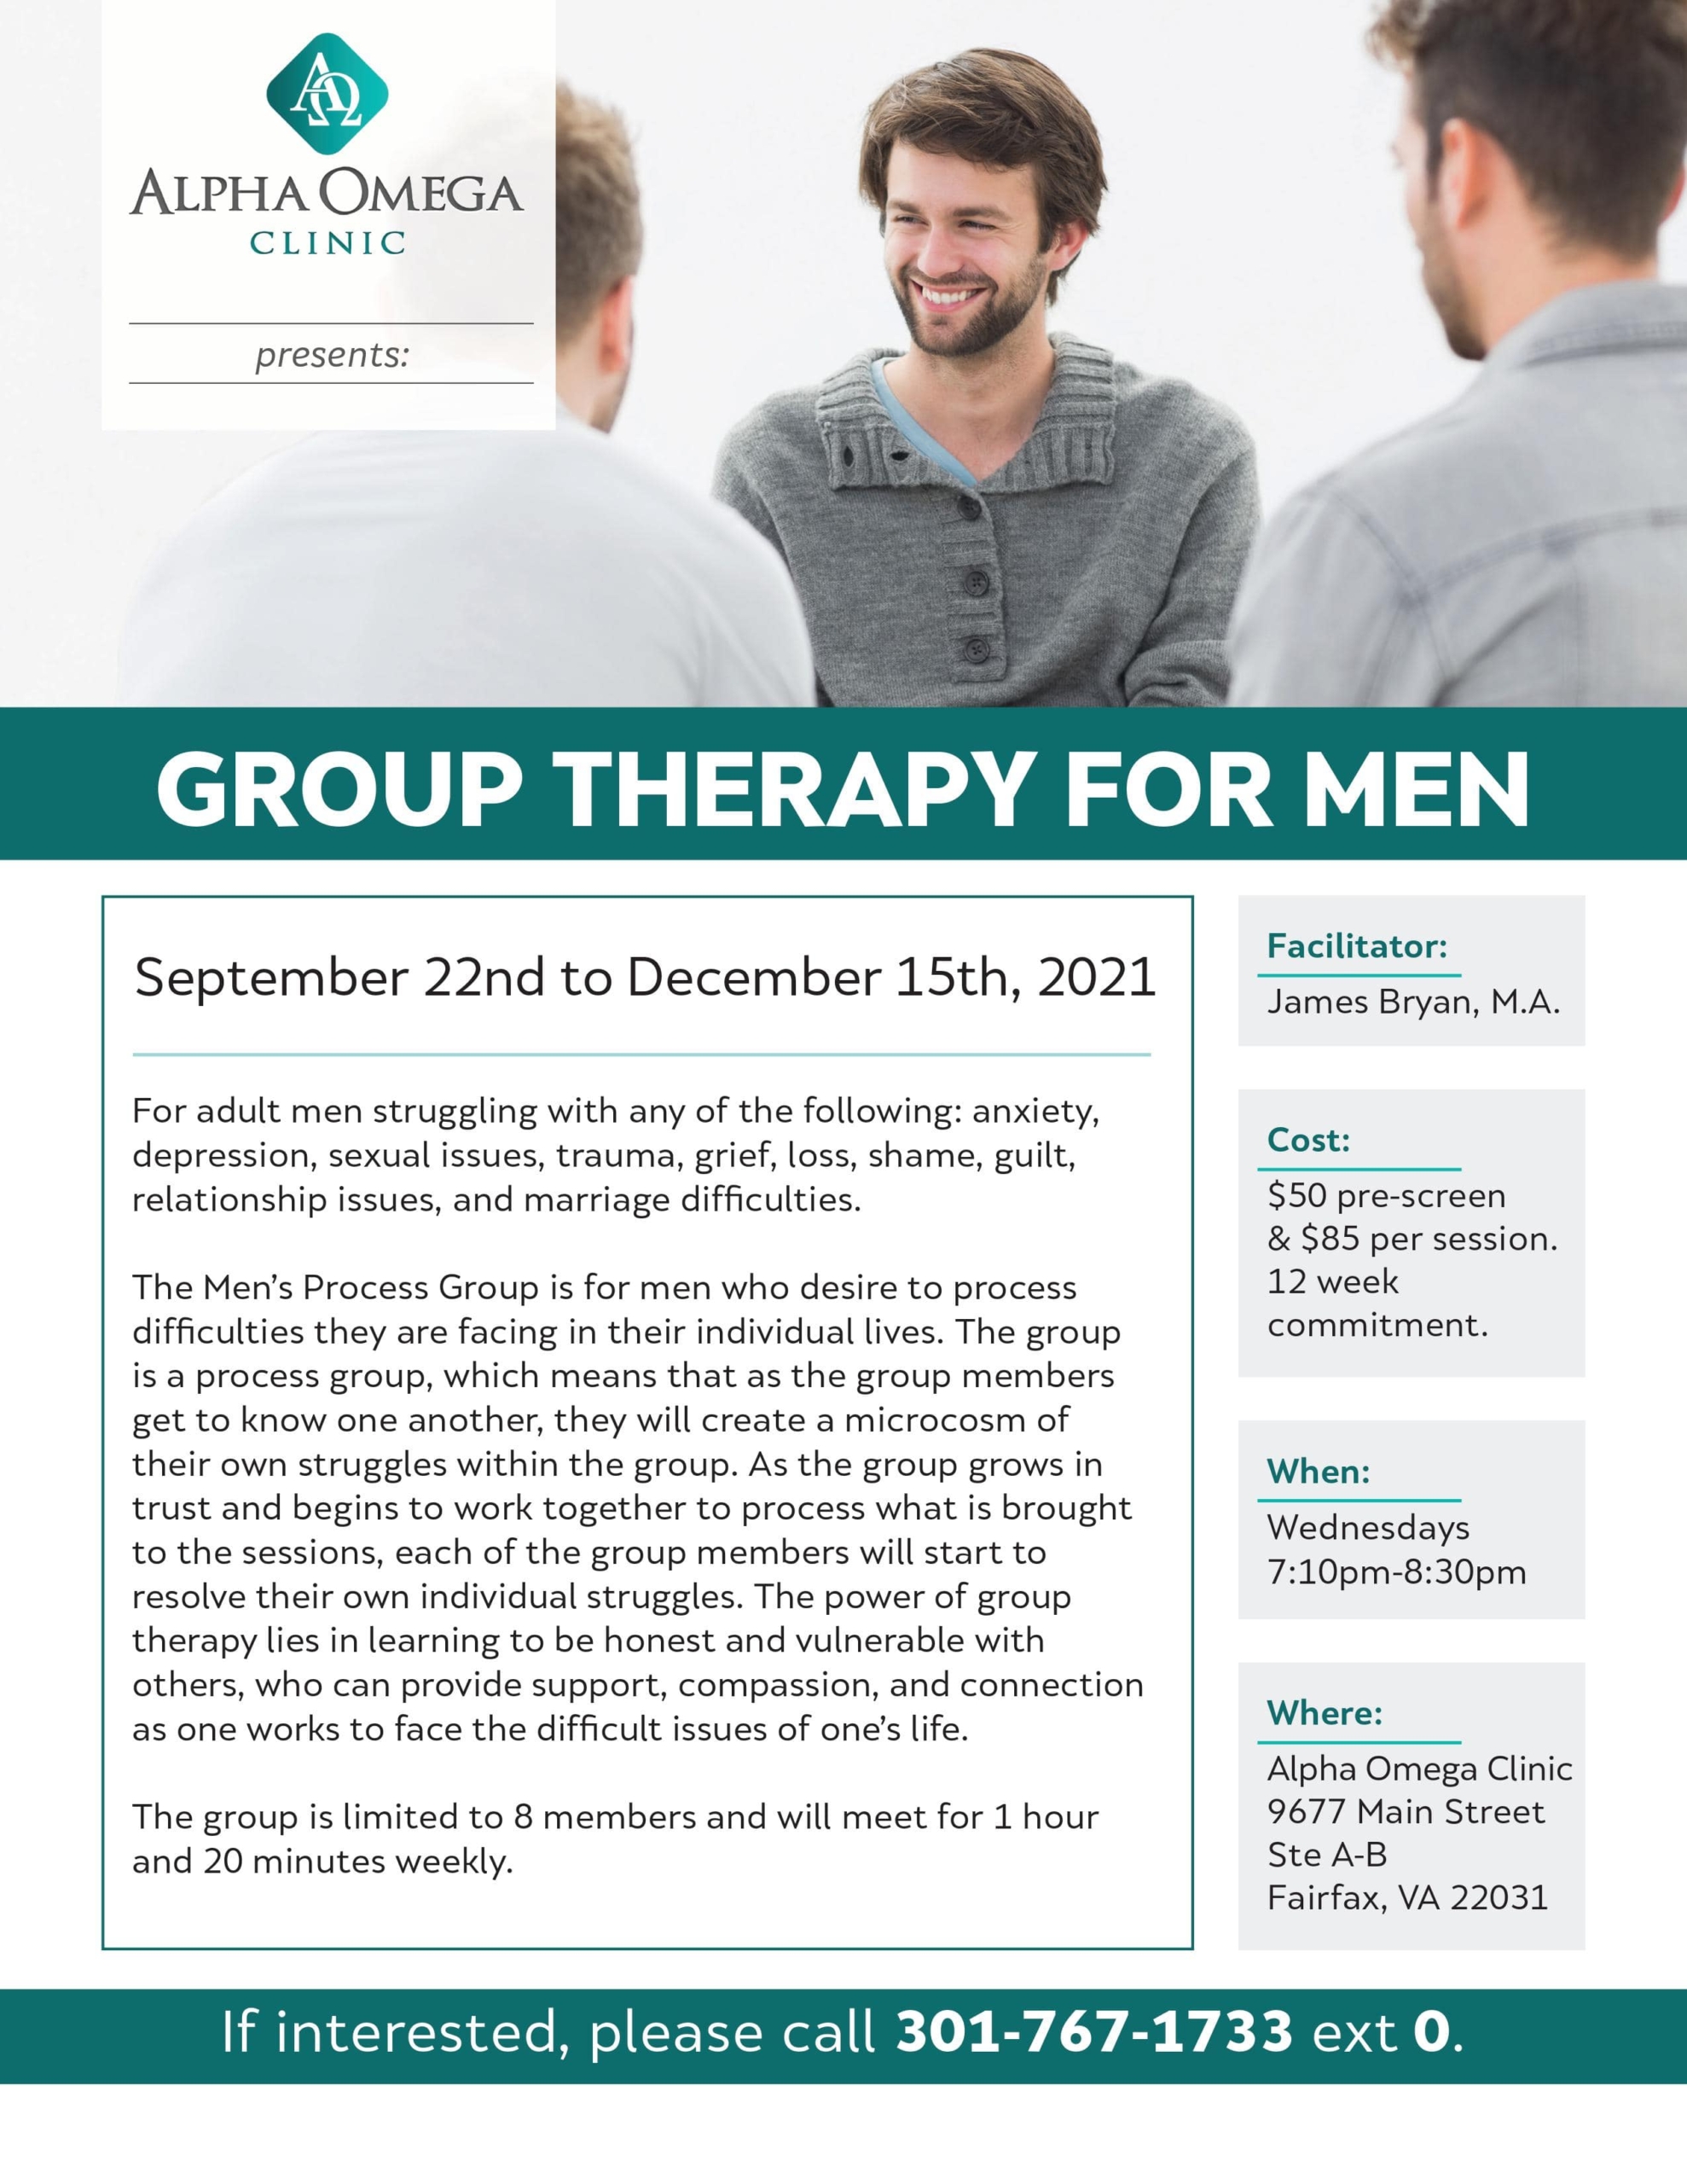 Group Therapy Men - Alpha Omega Clinic